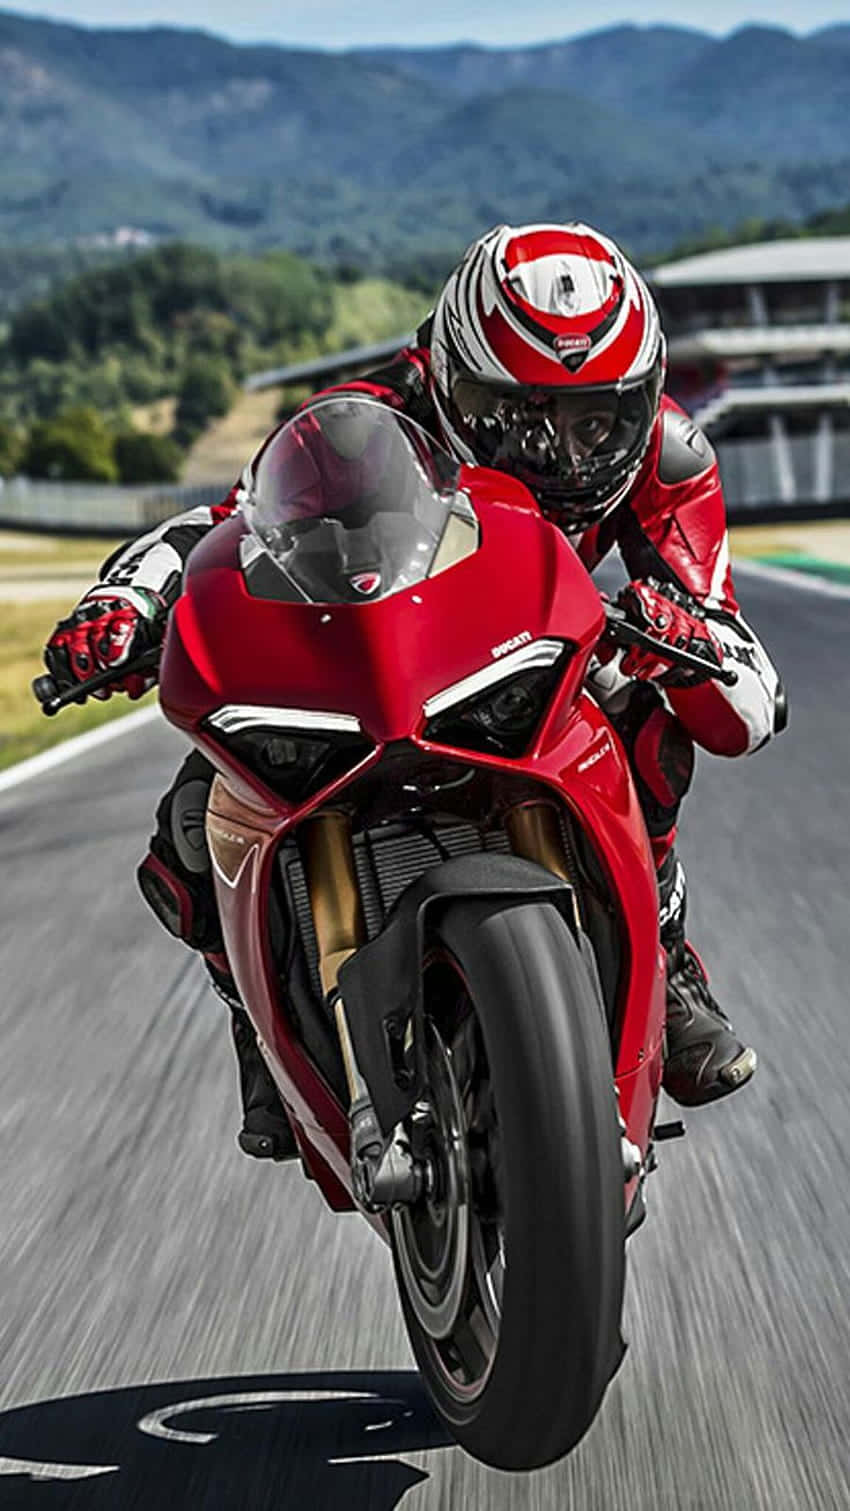 Feel the thrill of a wild ride on a Superbike